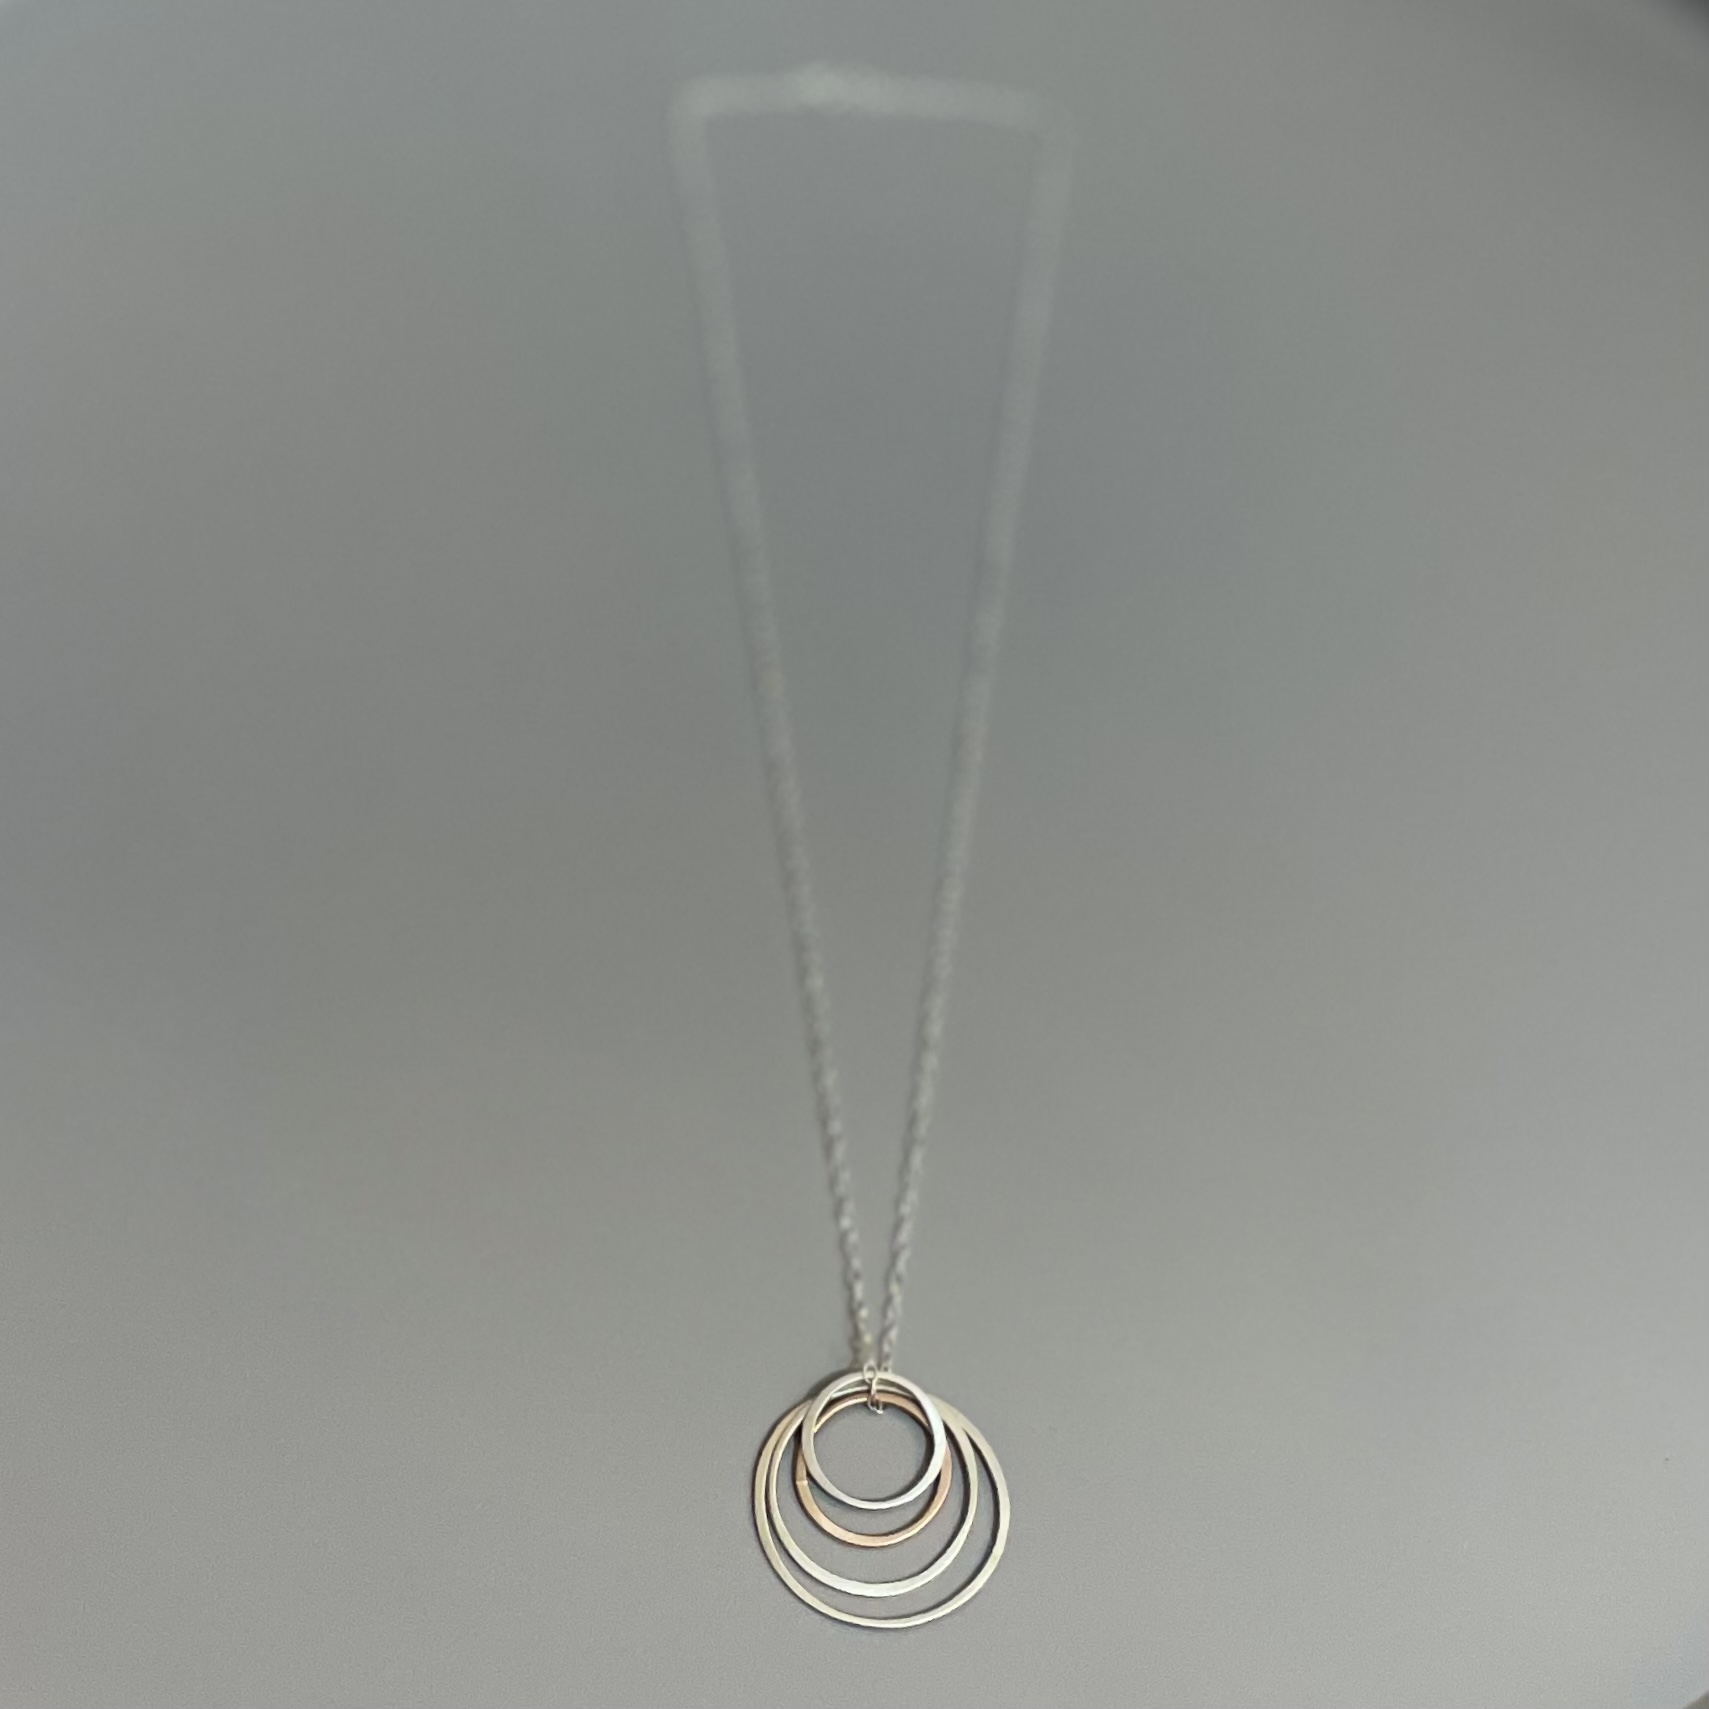 Rose gold and silver circle necklace by Rose Teleri